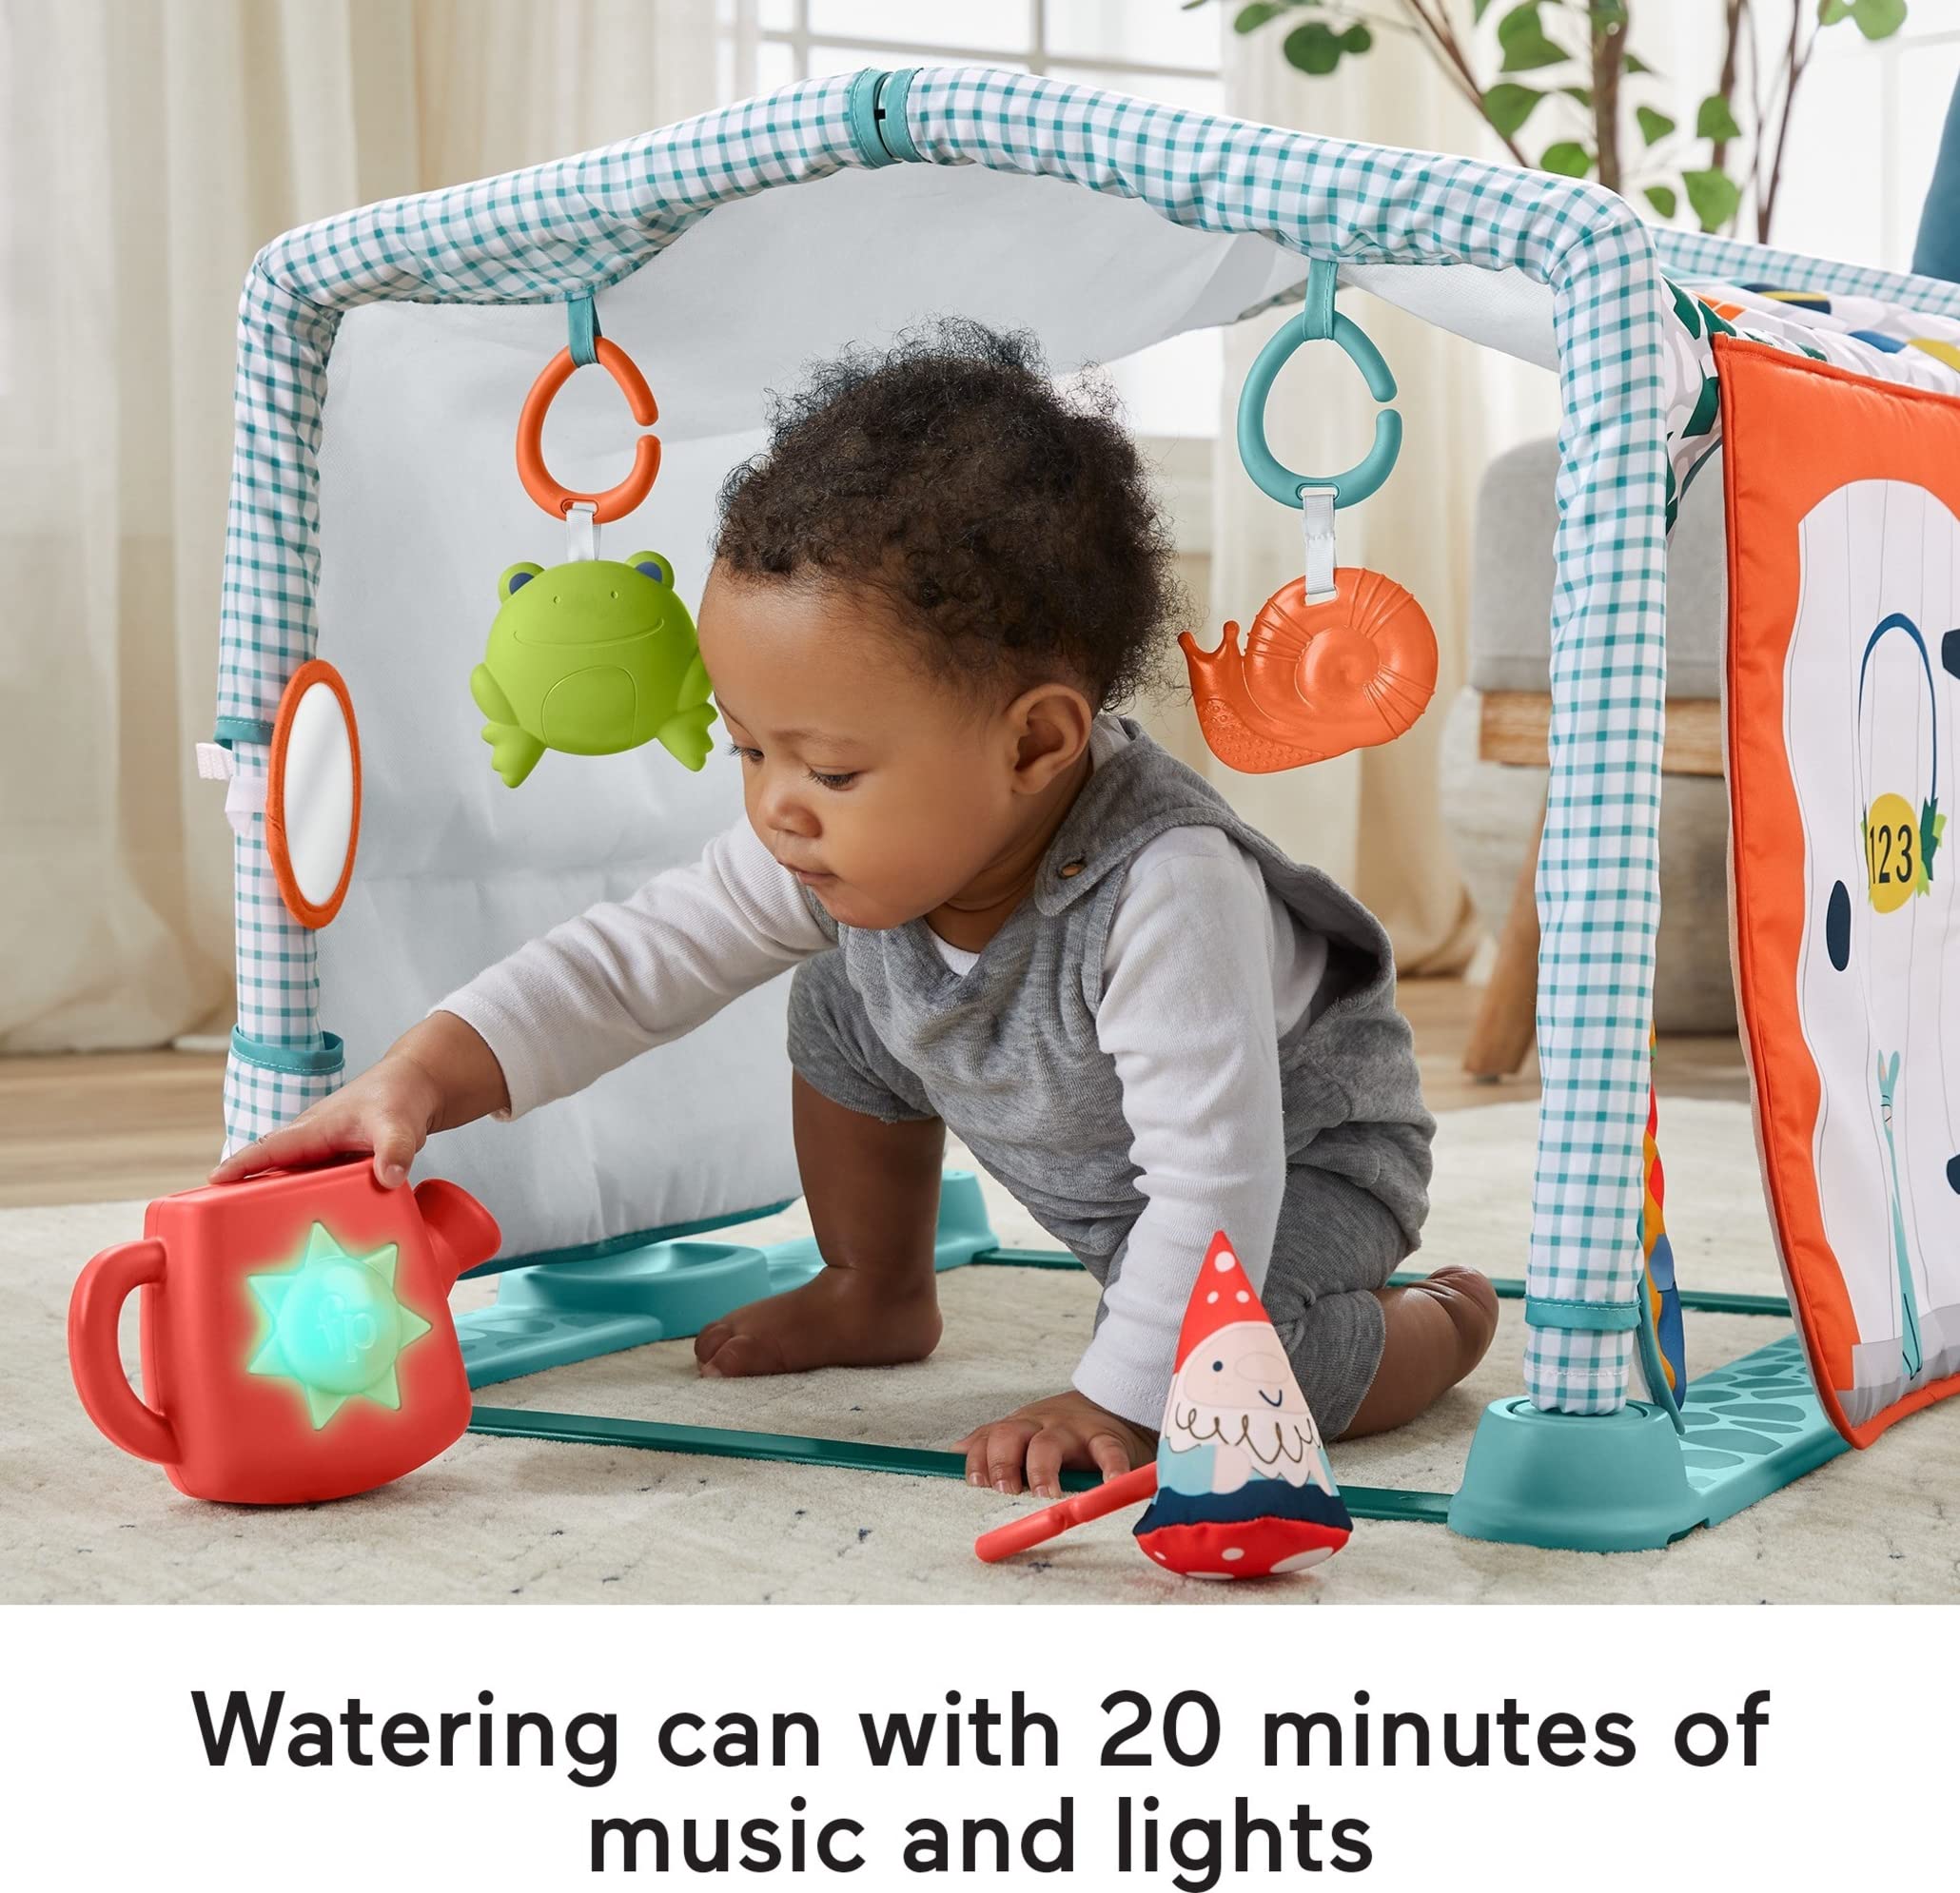 Fisher-Price Playmat 3-In-1 Crawl & Play Activity Gym With 5 Baby Toys For Newborn To Toddler Sensory & Fine Motor Play